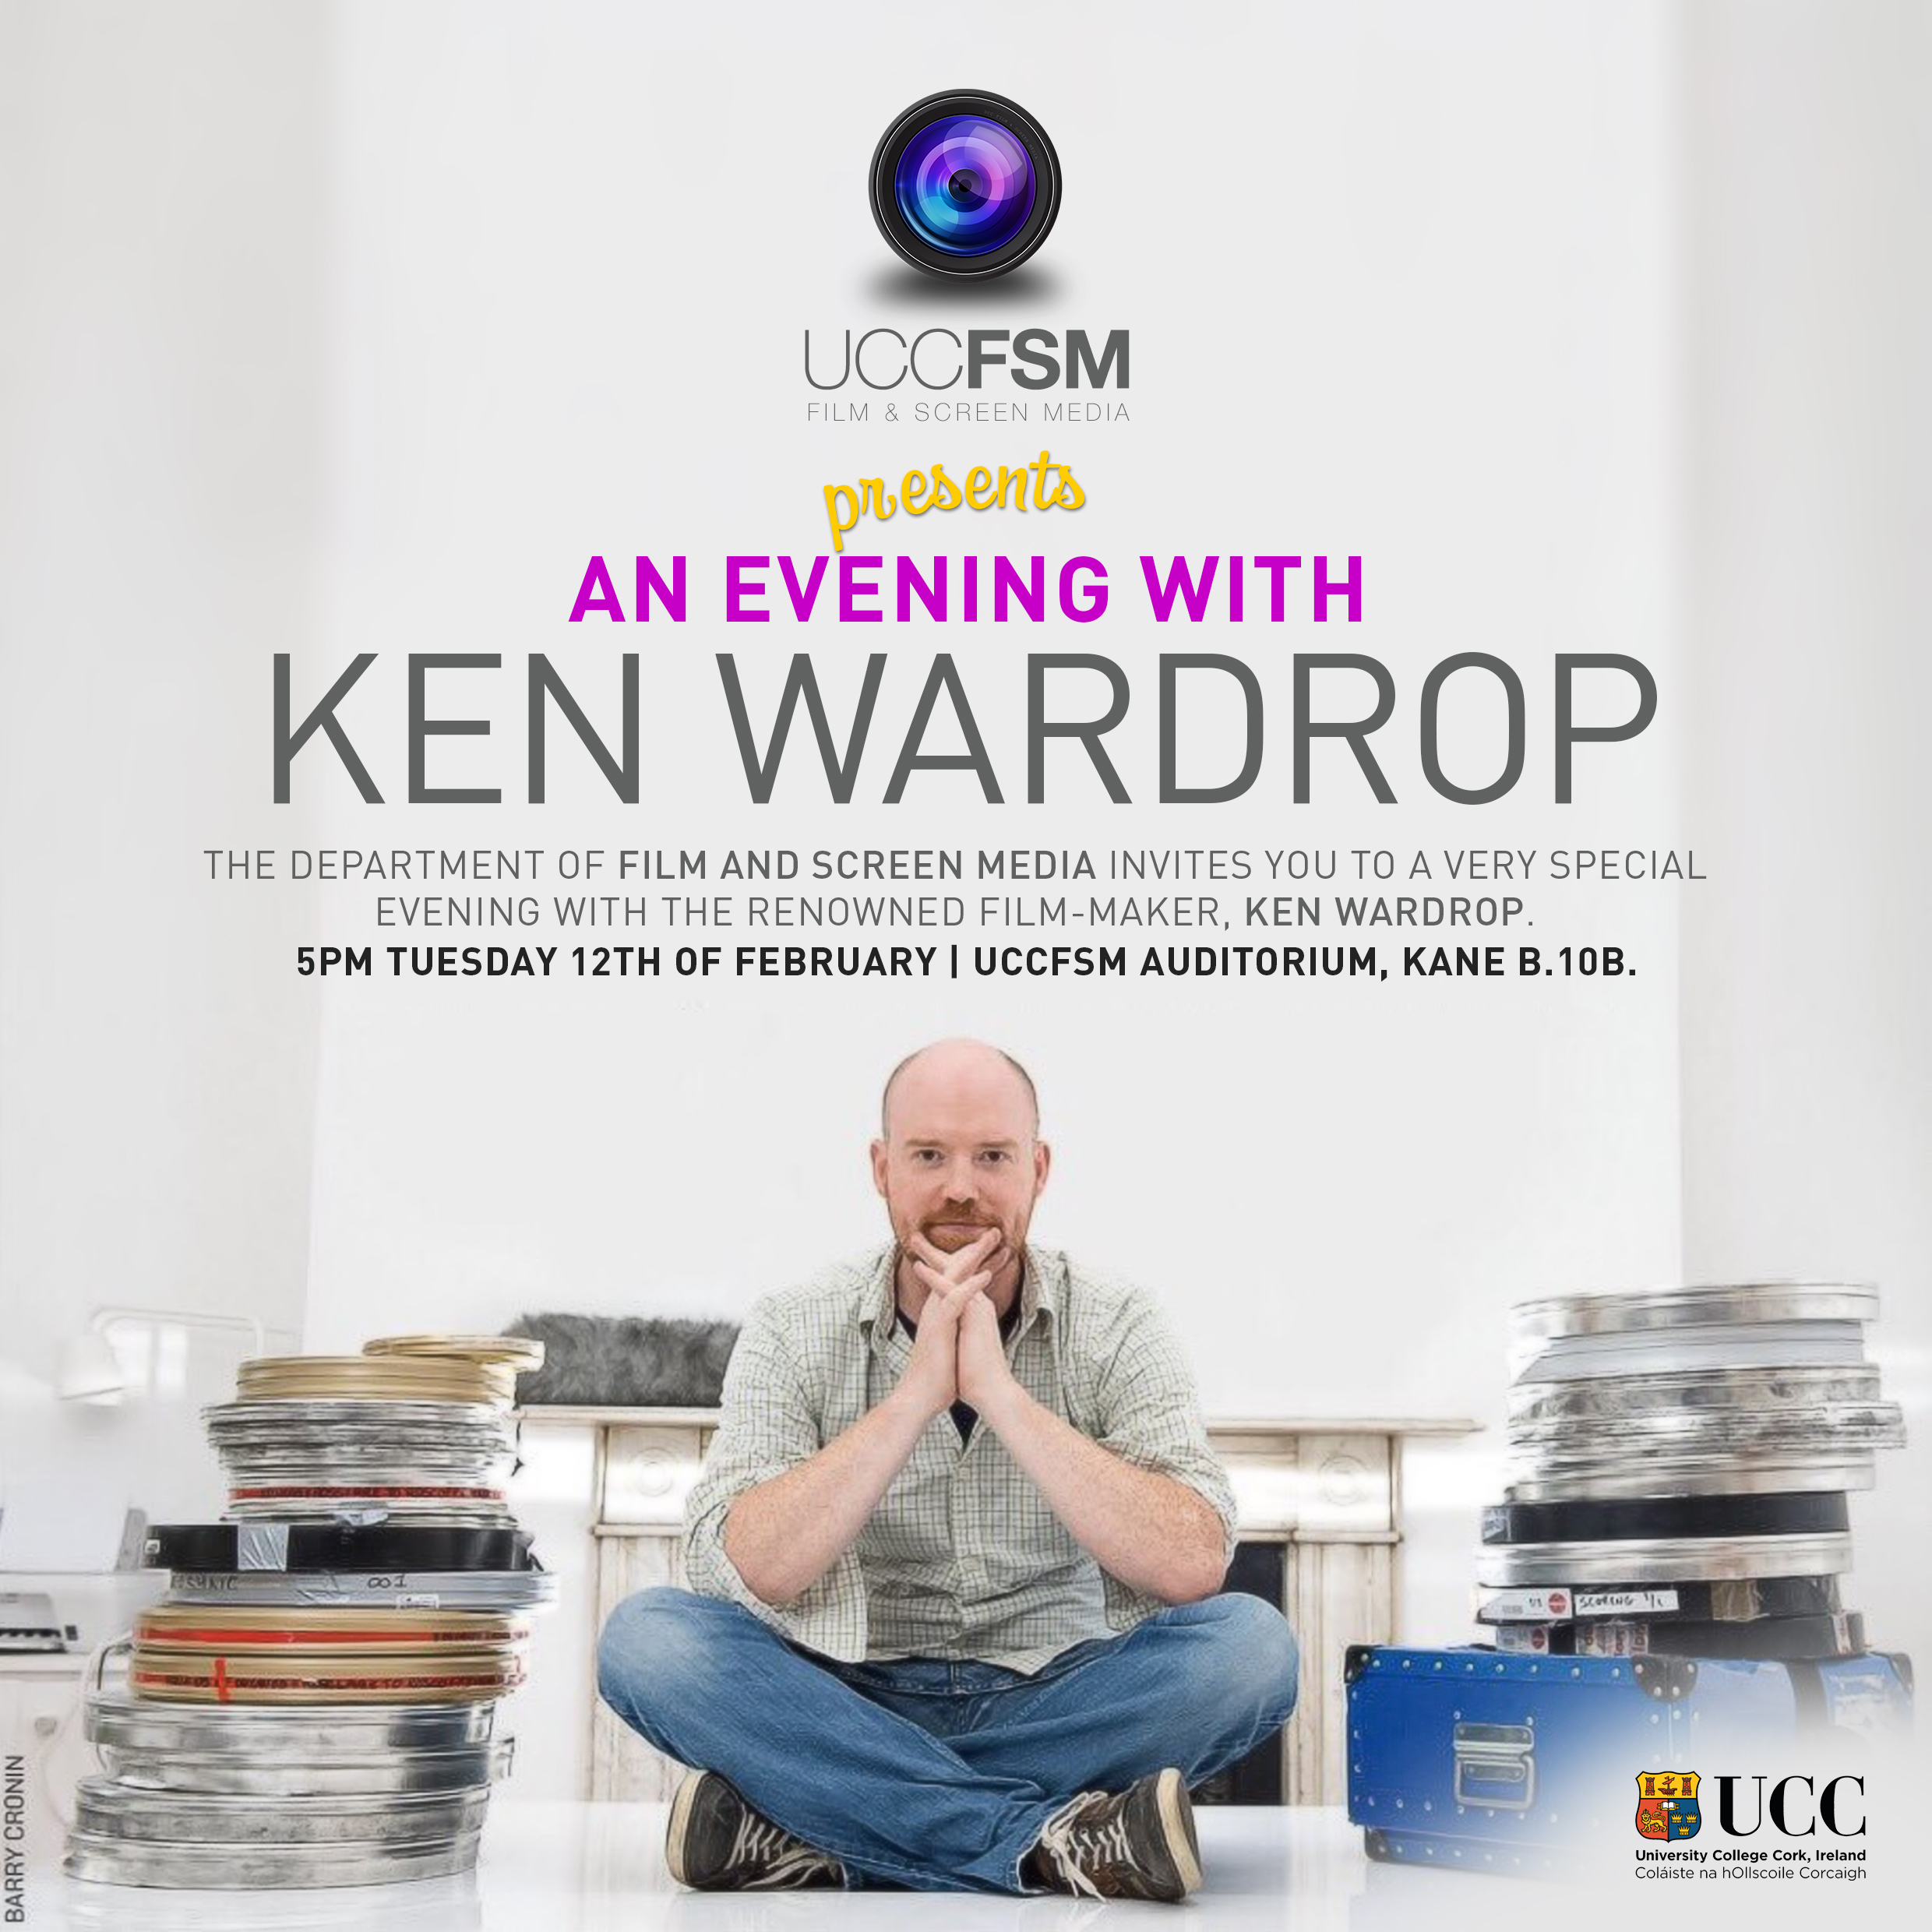 Public lecture by acclaimed director Ken Wardrop. Tues 5pm, UCC.